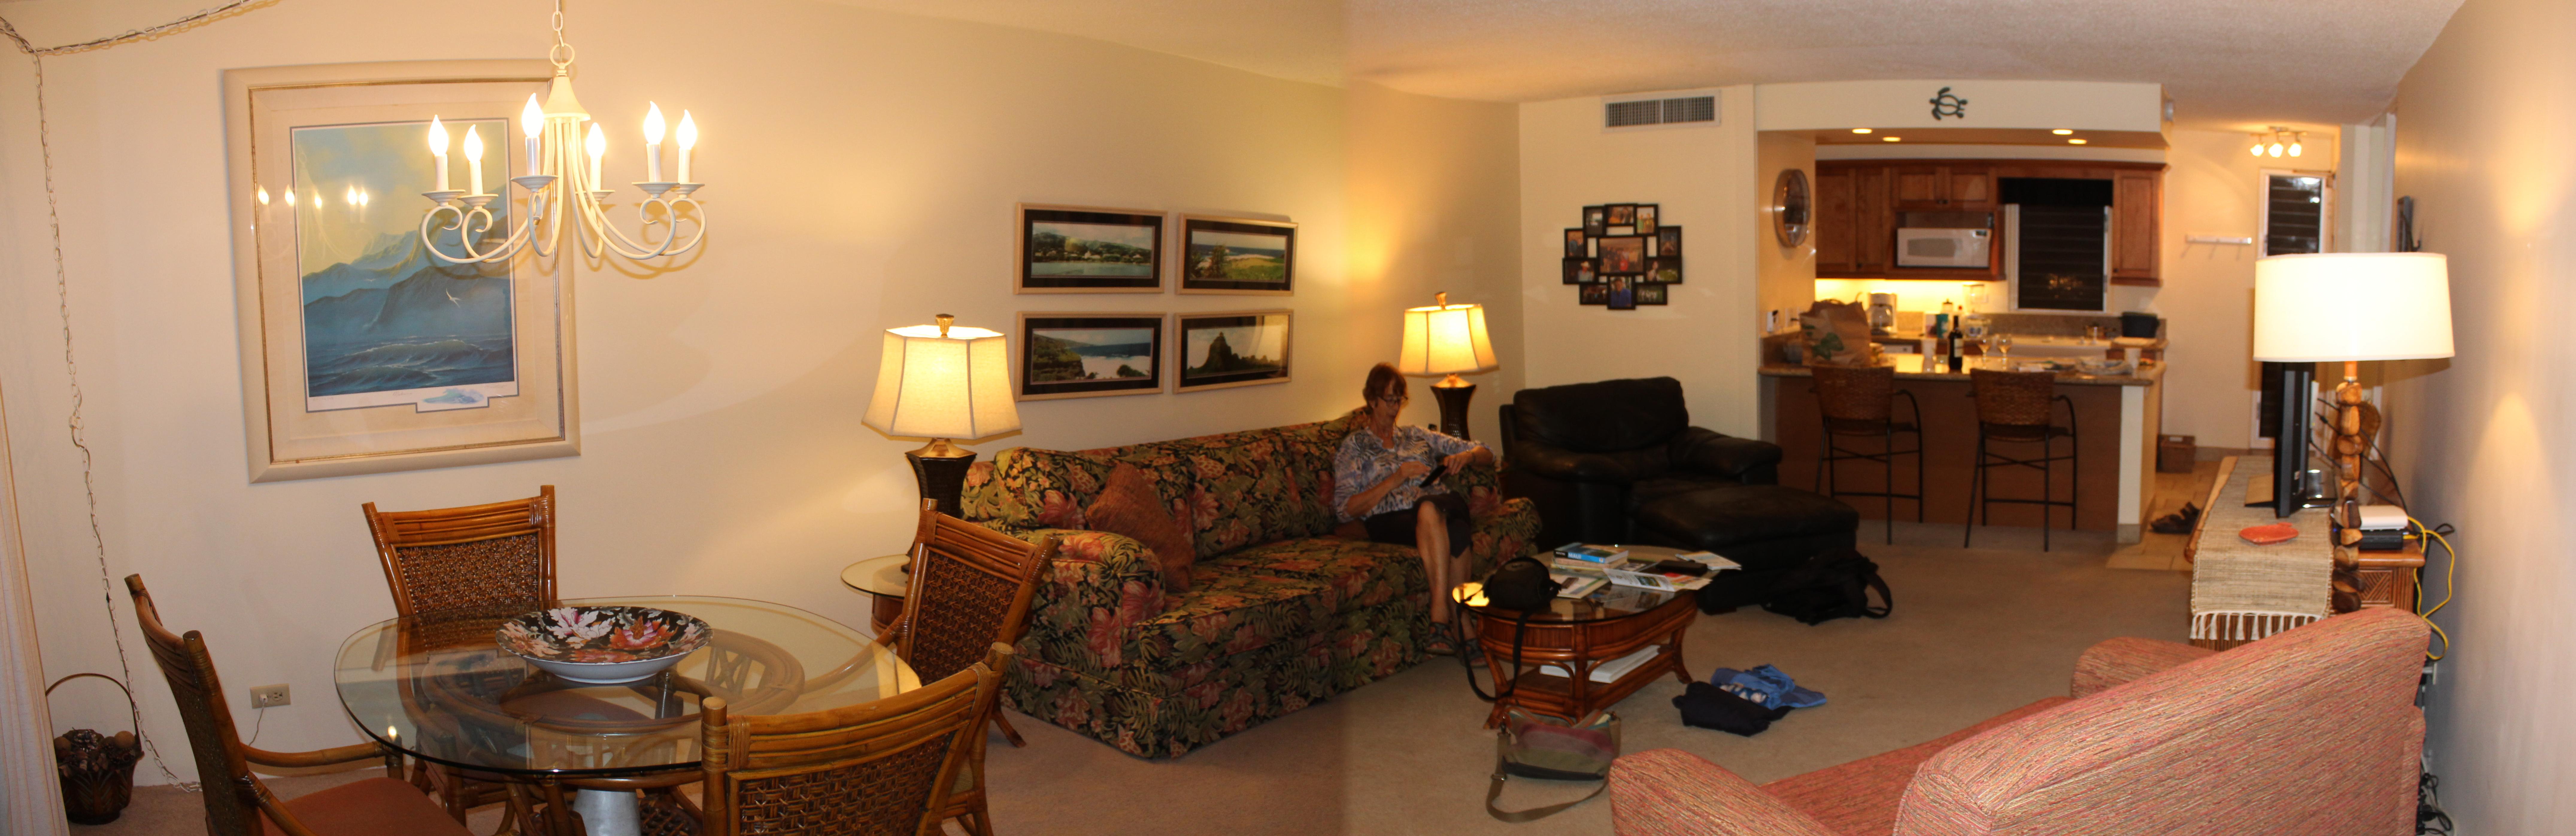 Our living space in the Ka'anapali Villas, Maui.